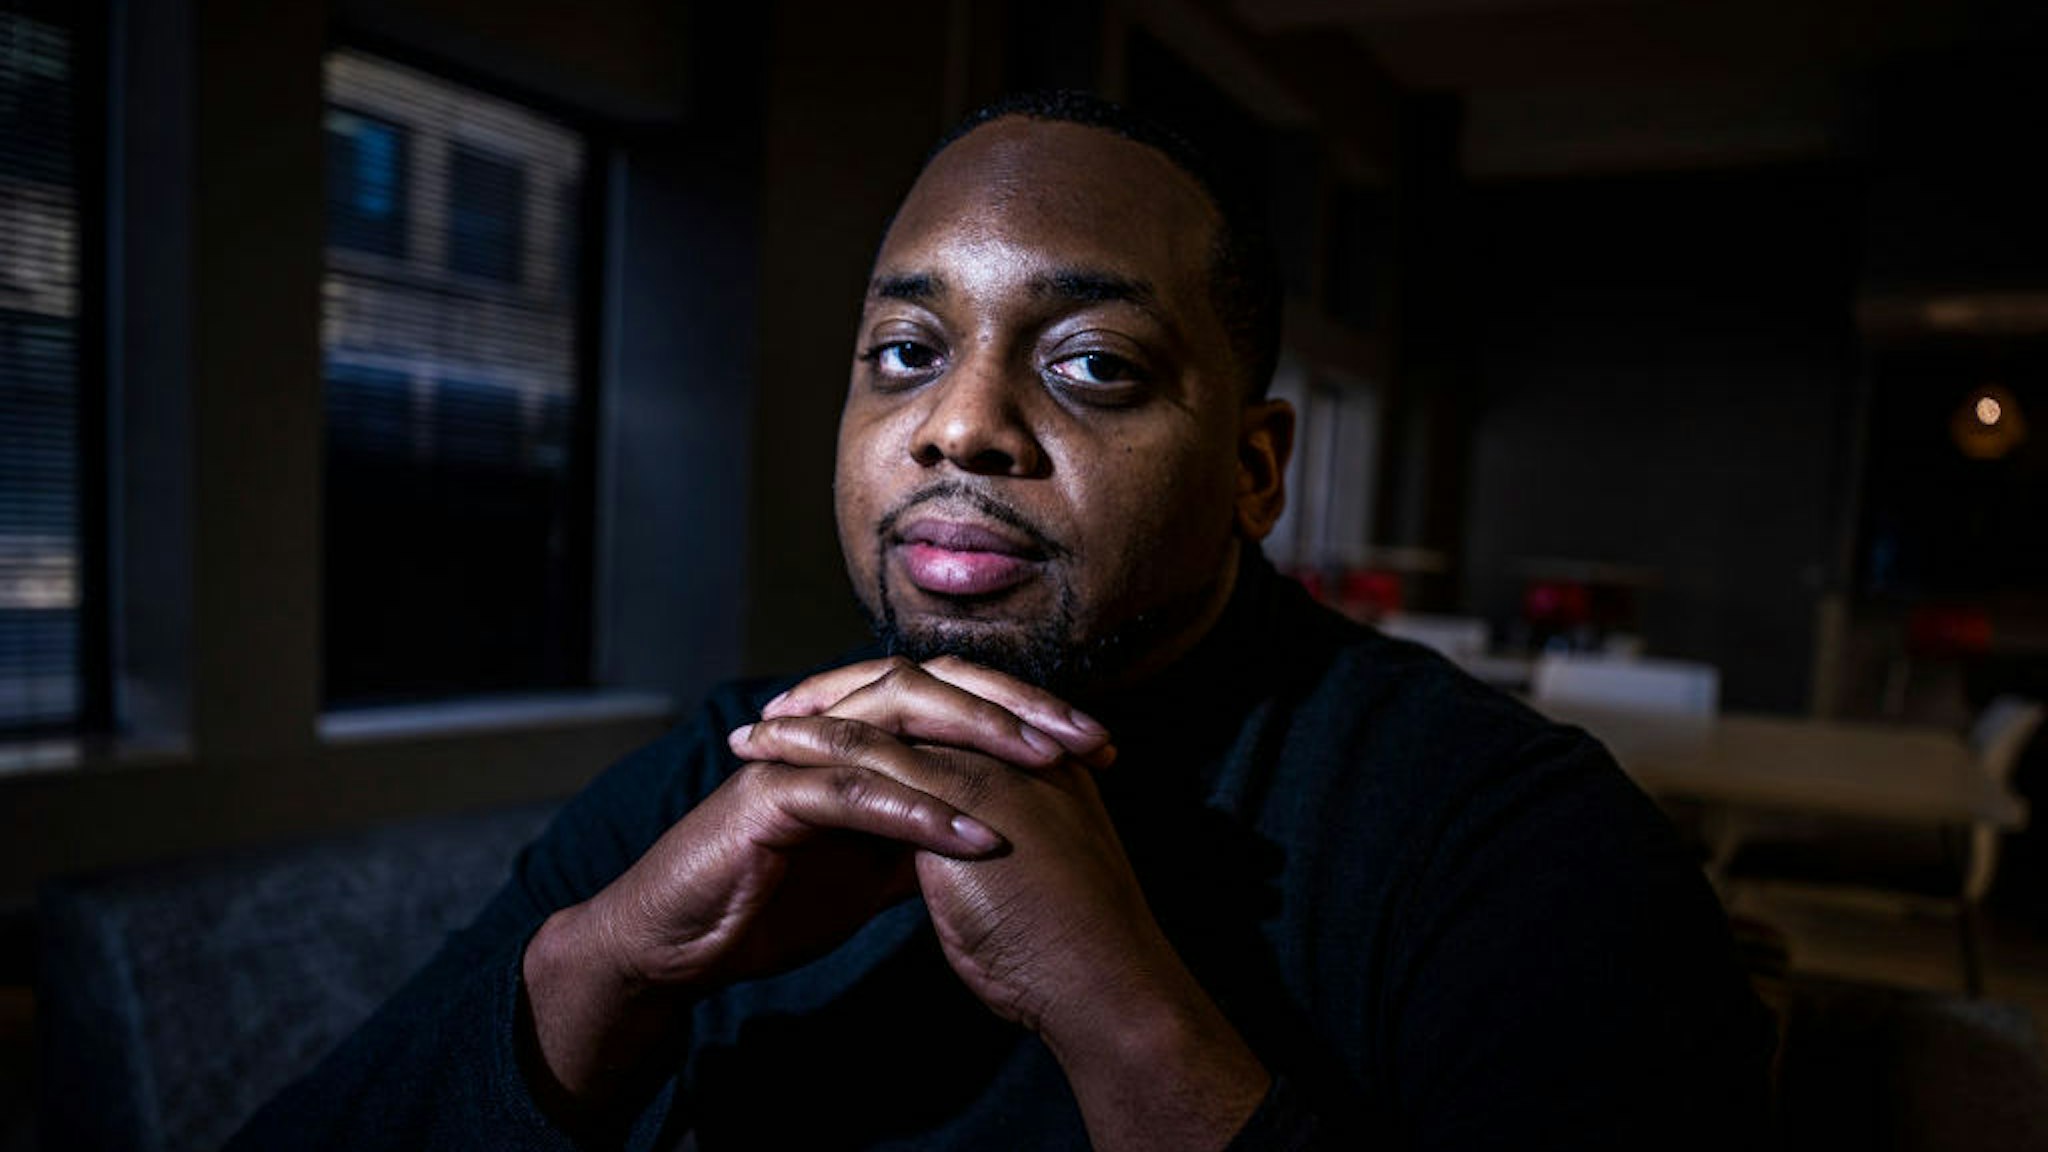 On Wednesday April 28, 2021 in downtown Minneapolis MN, Brandon Mitchell, a juror in the Derek Chauvin trial for the death of George Floyd, speaks out about his experience. (Star Tribune via Getty Images / Contributor)